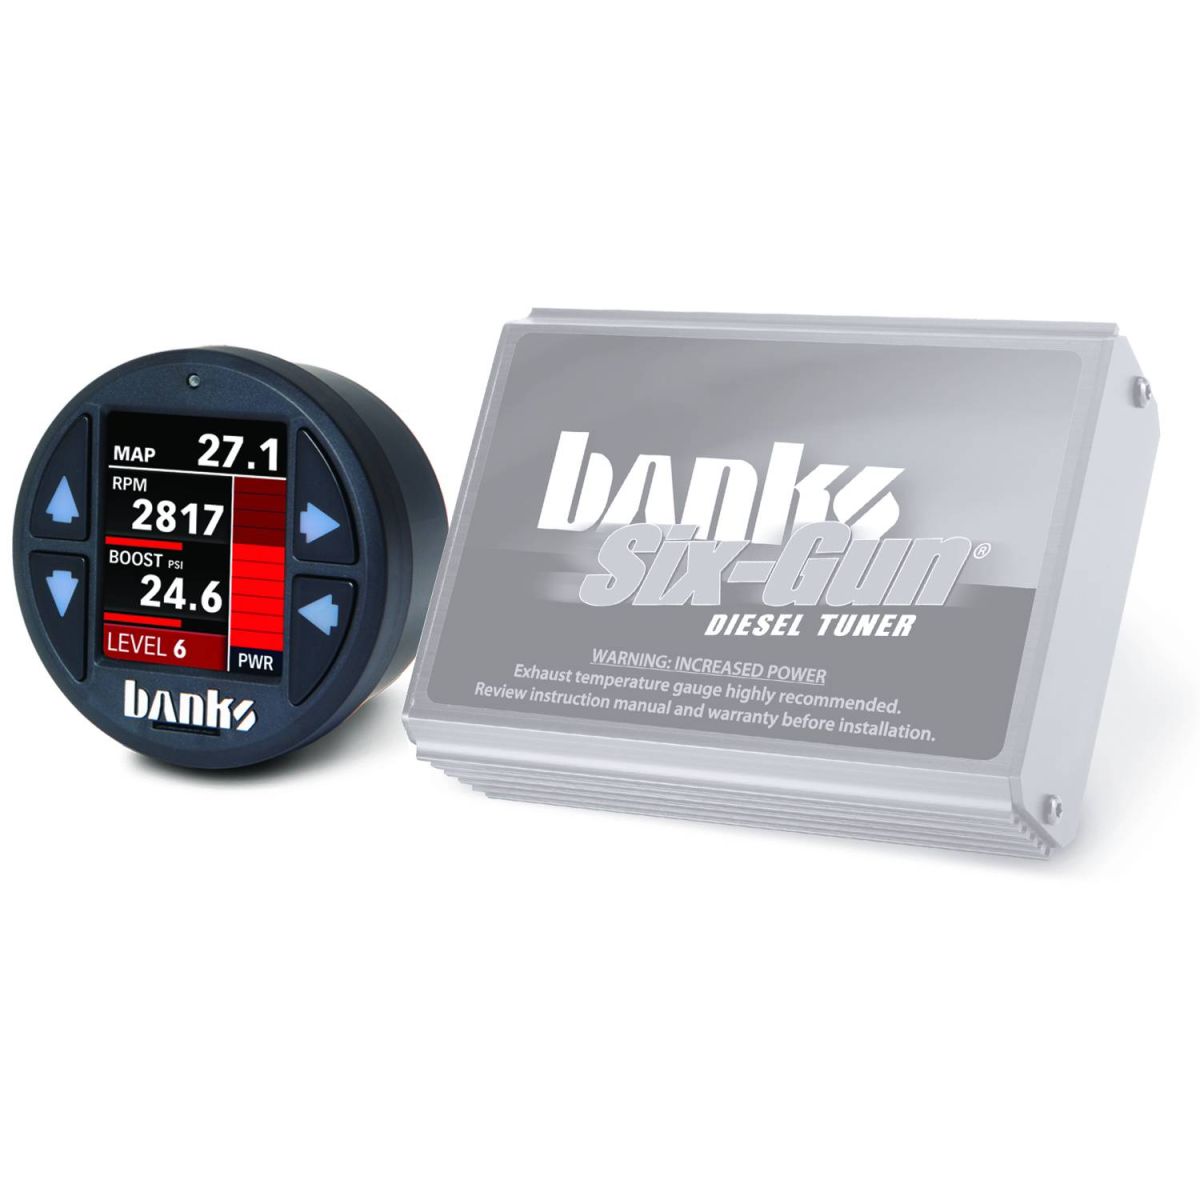 Banks Power - Banks Power Six-Gun Diesel Tuner with Banks iDash 1.8 Super Gauge for use with 2006-2007 Chevy 6.6L, LLY-LBZ